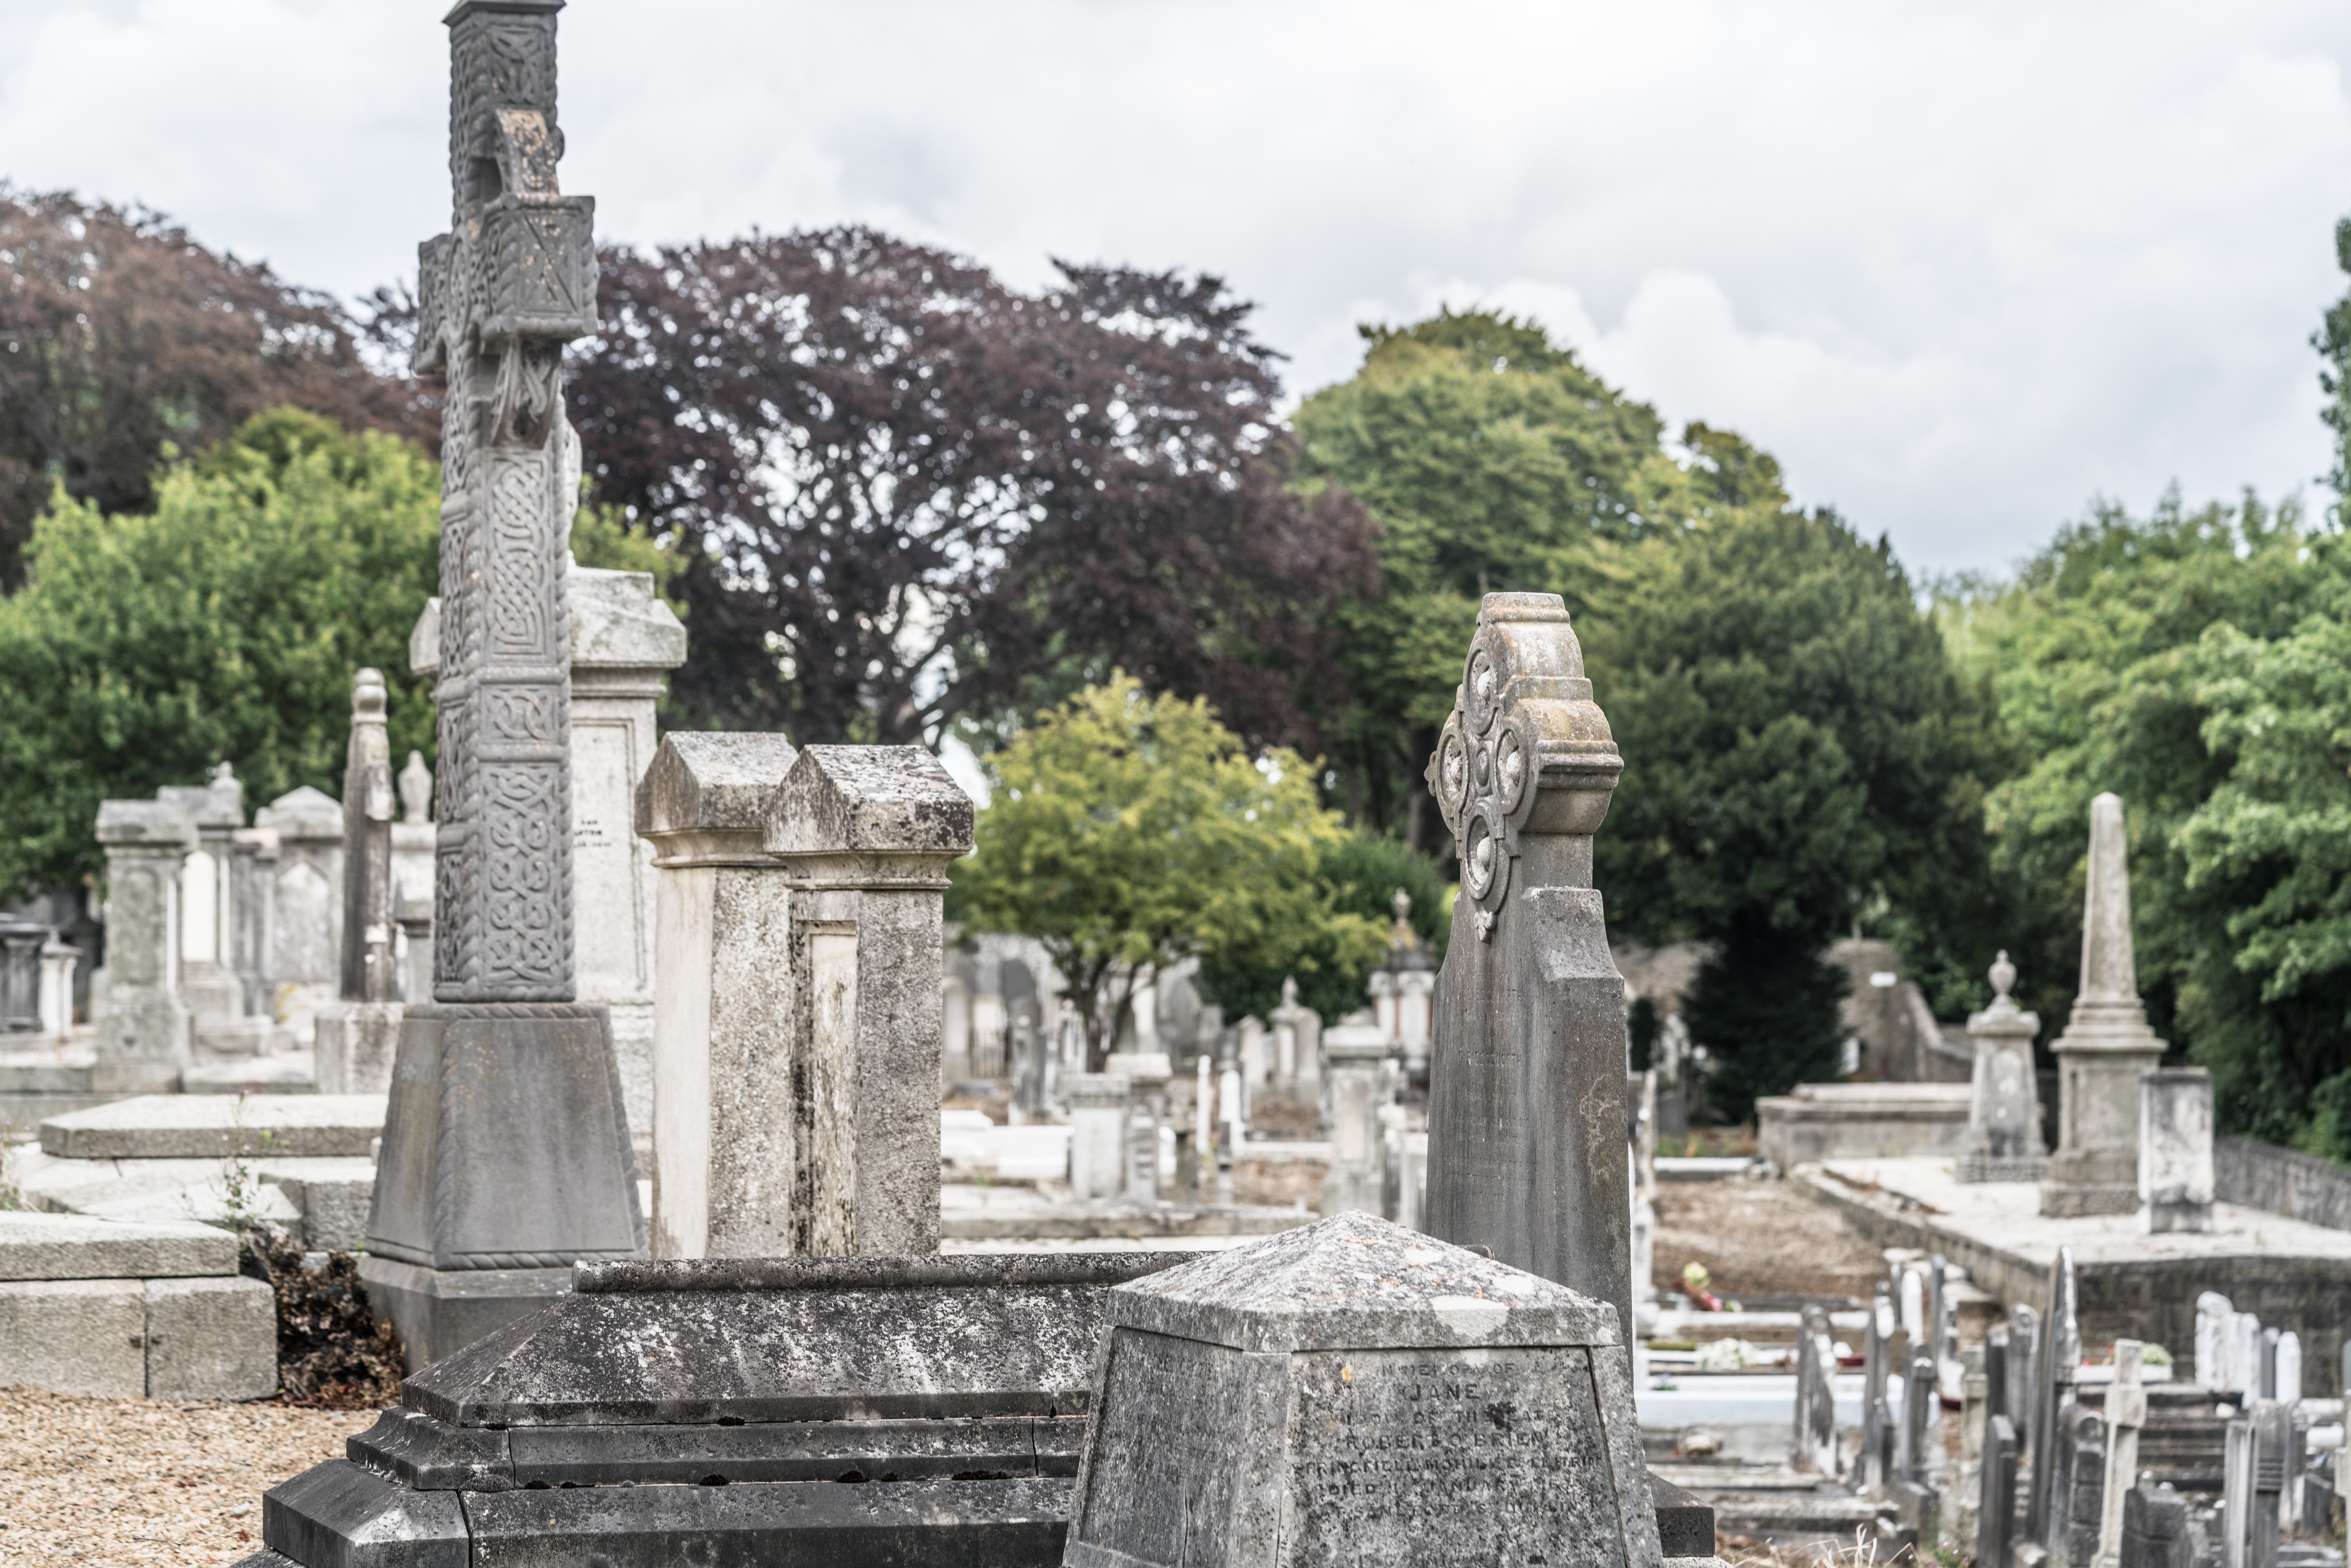  Mount Jerome Cemetery - August 2017 005 